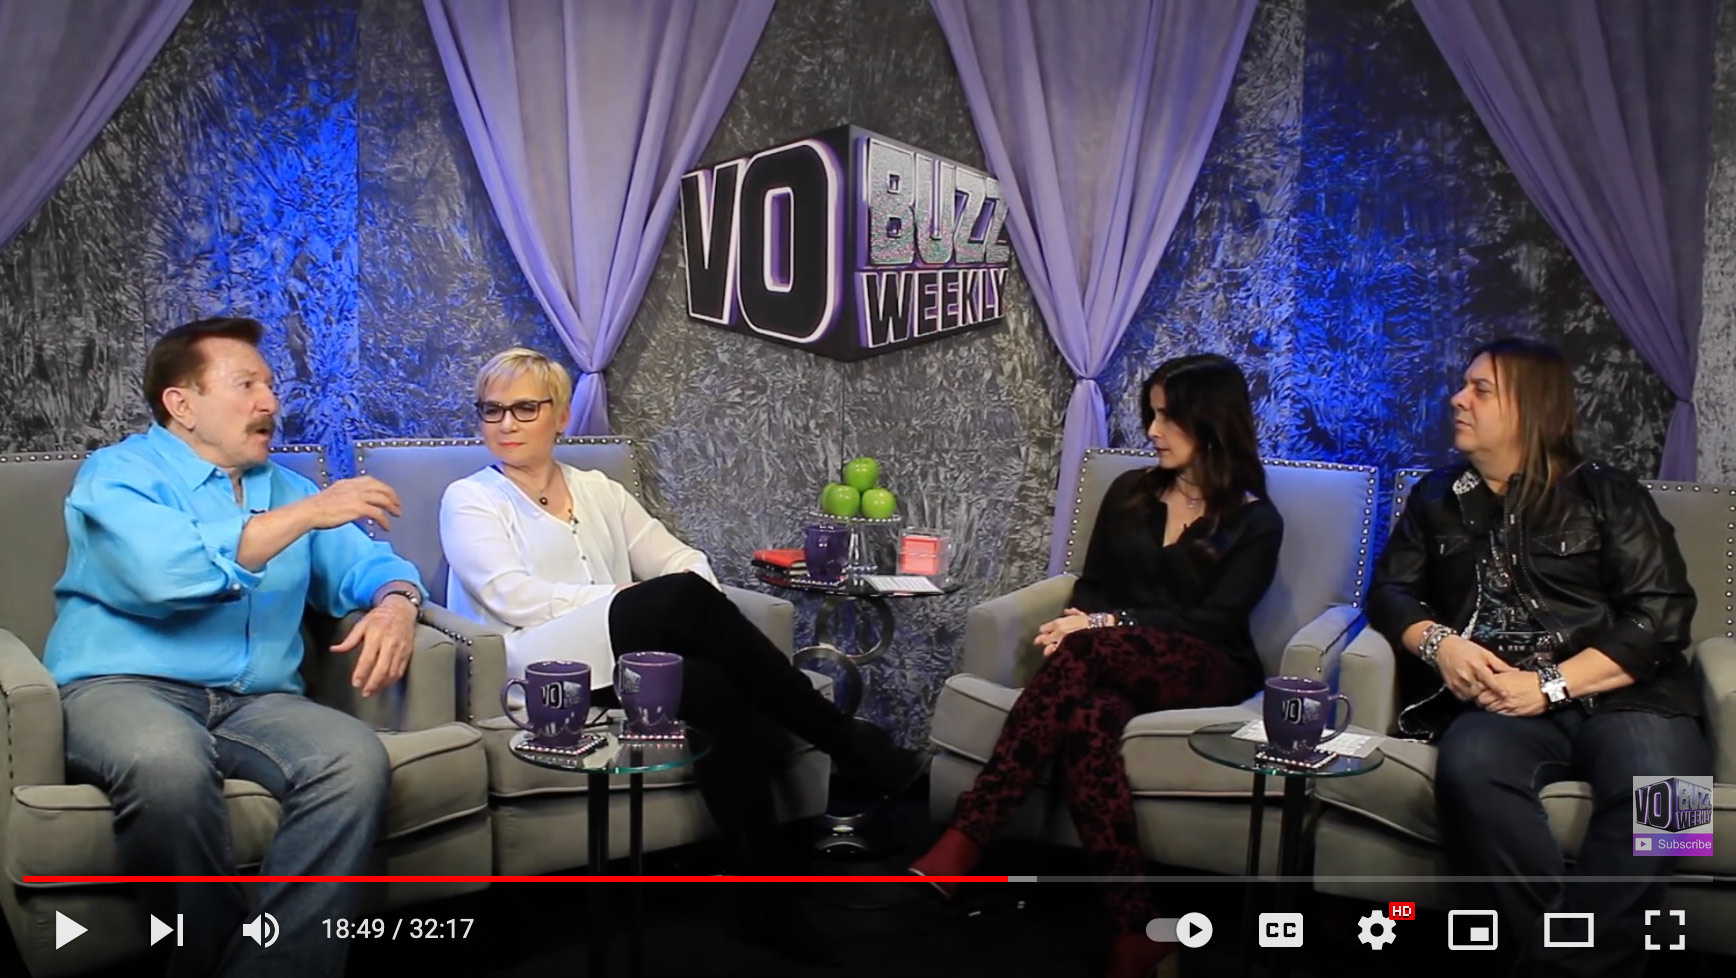 Harvey and Cathy with VO Buzz weekly